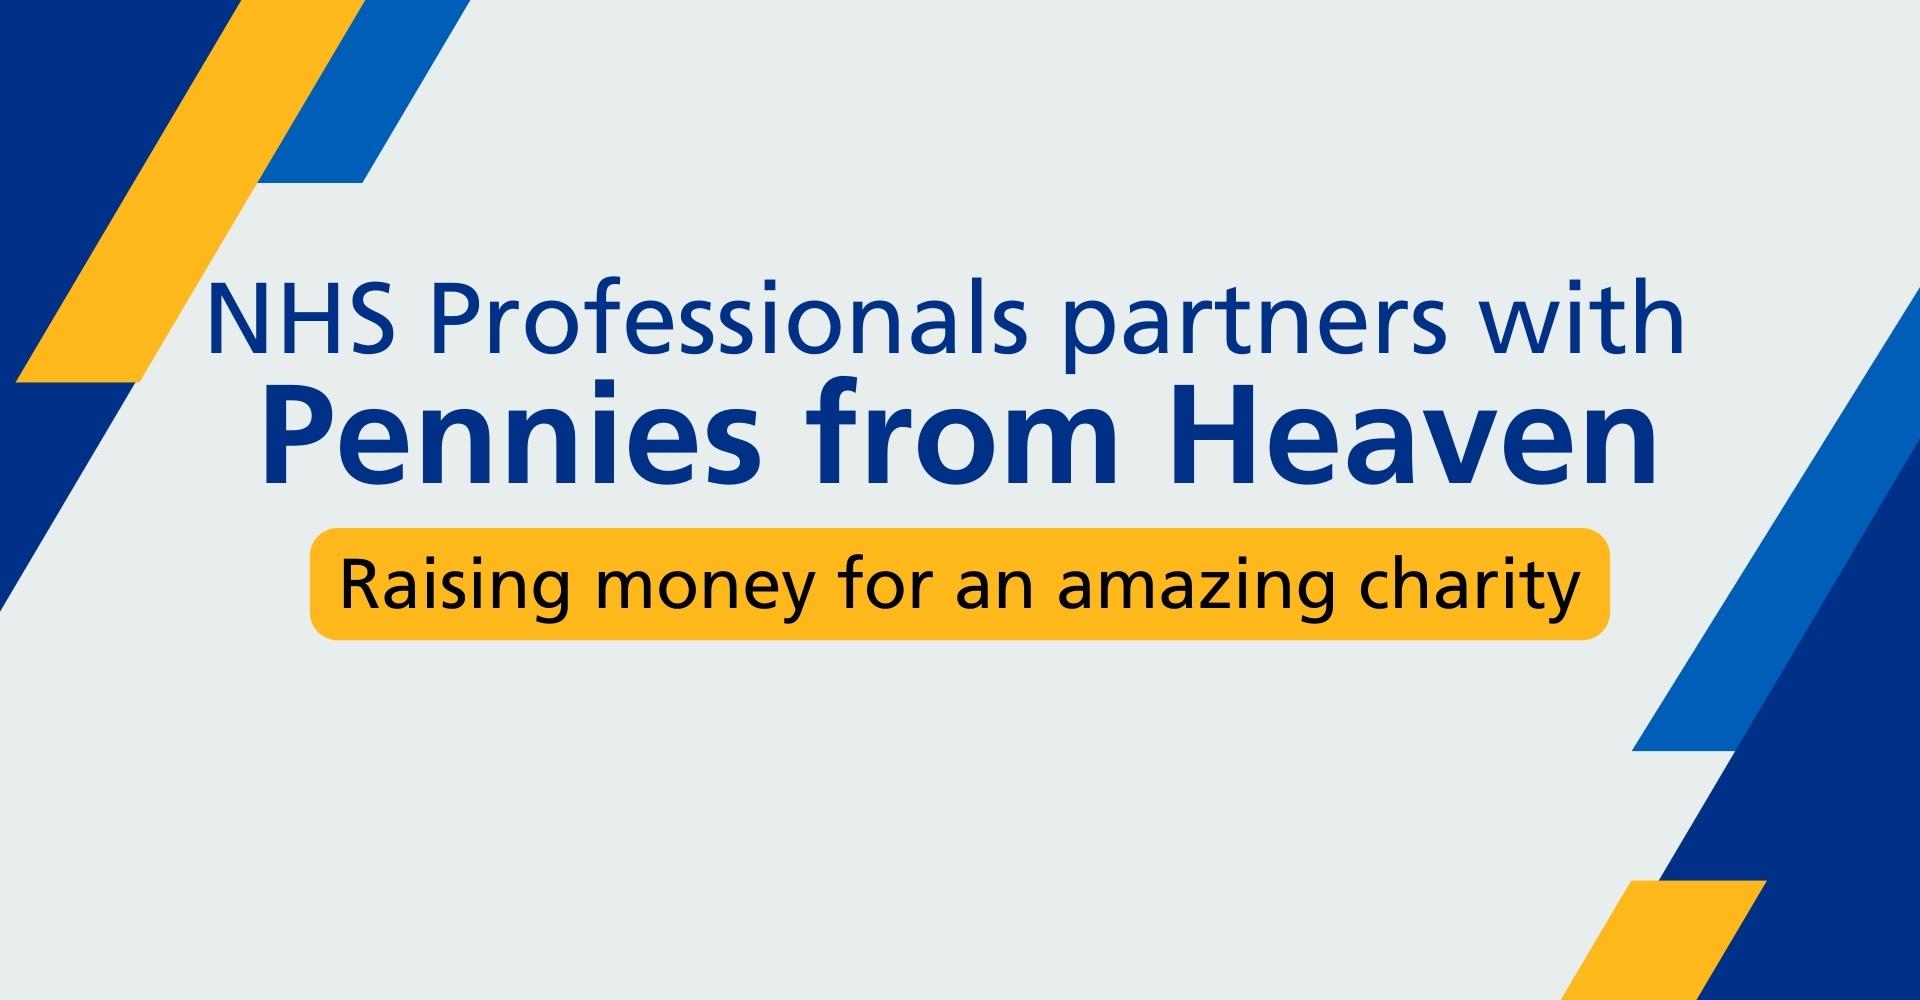 NHSP Partners with Pennies from Heaven